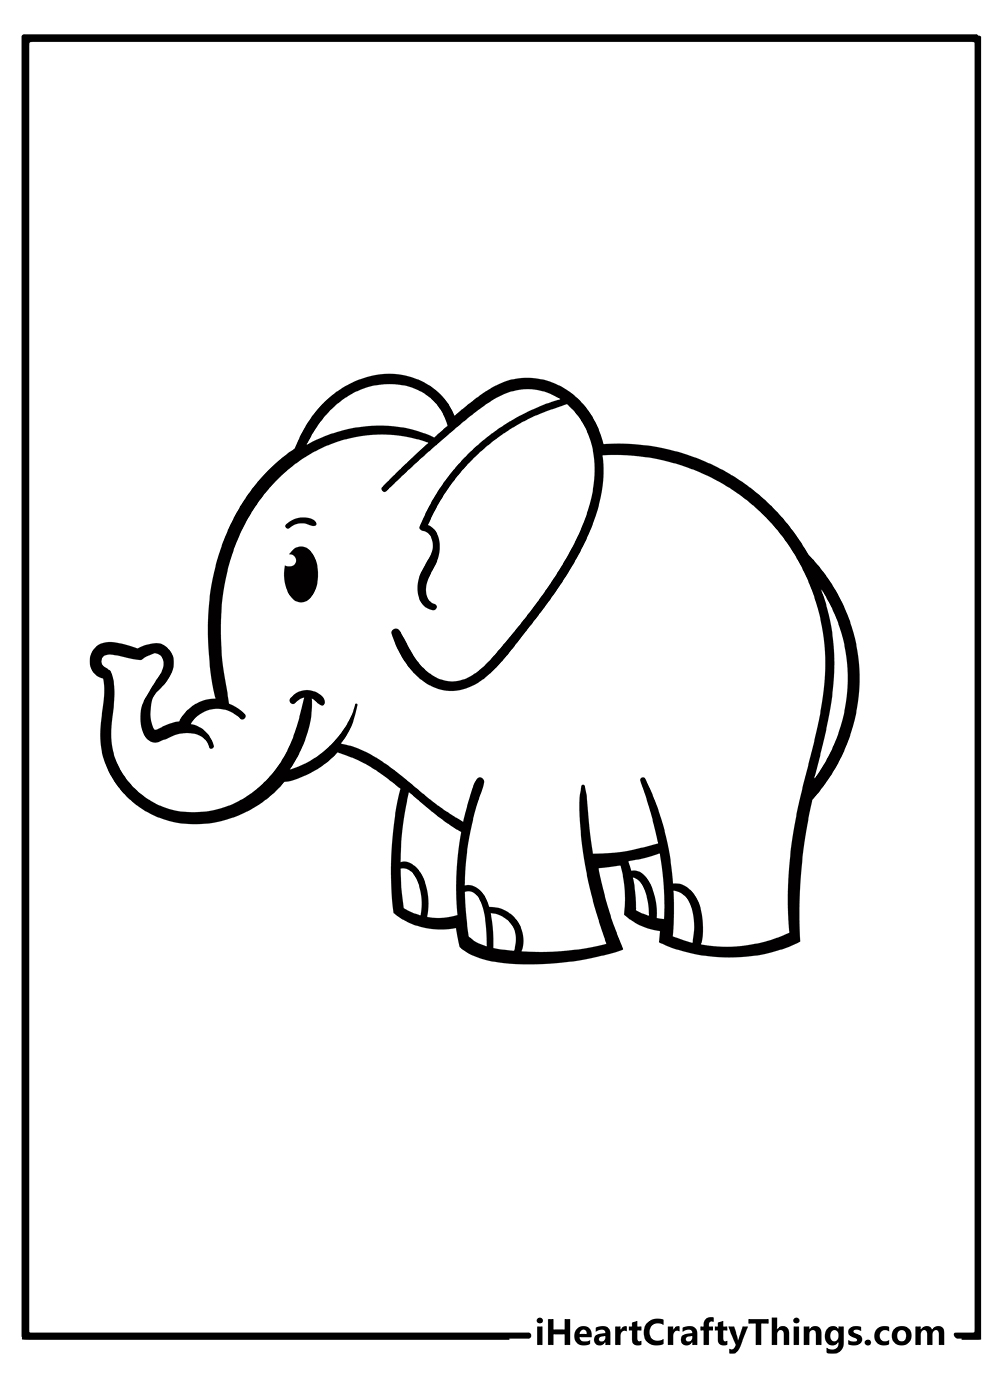 Printable Elephant Coloring Pages Updated 18